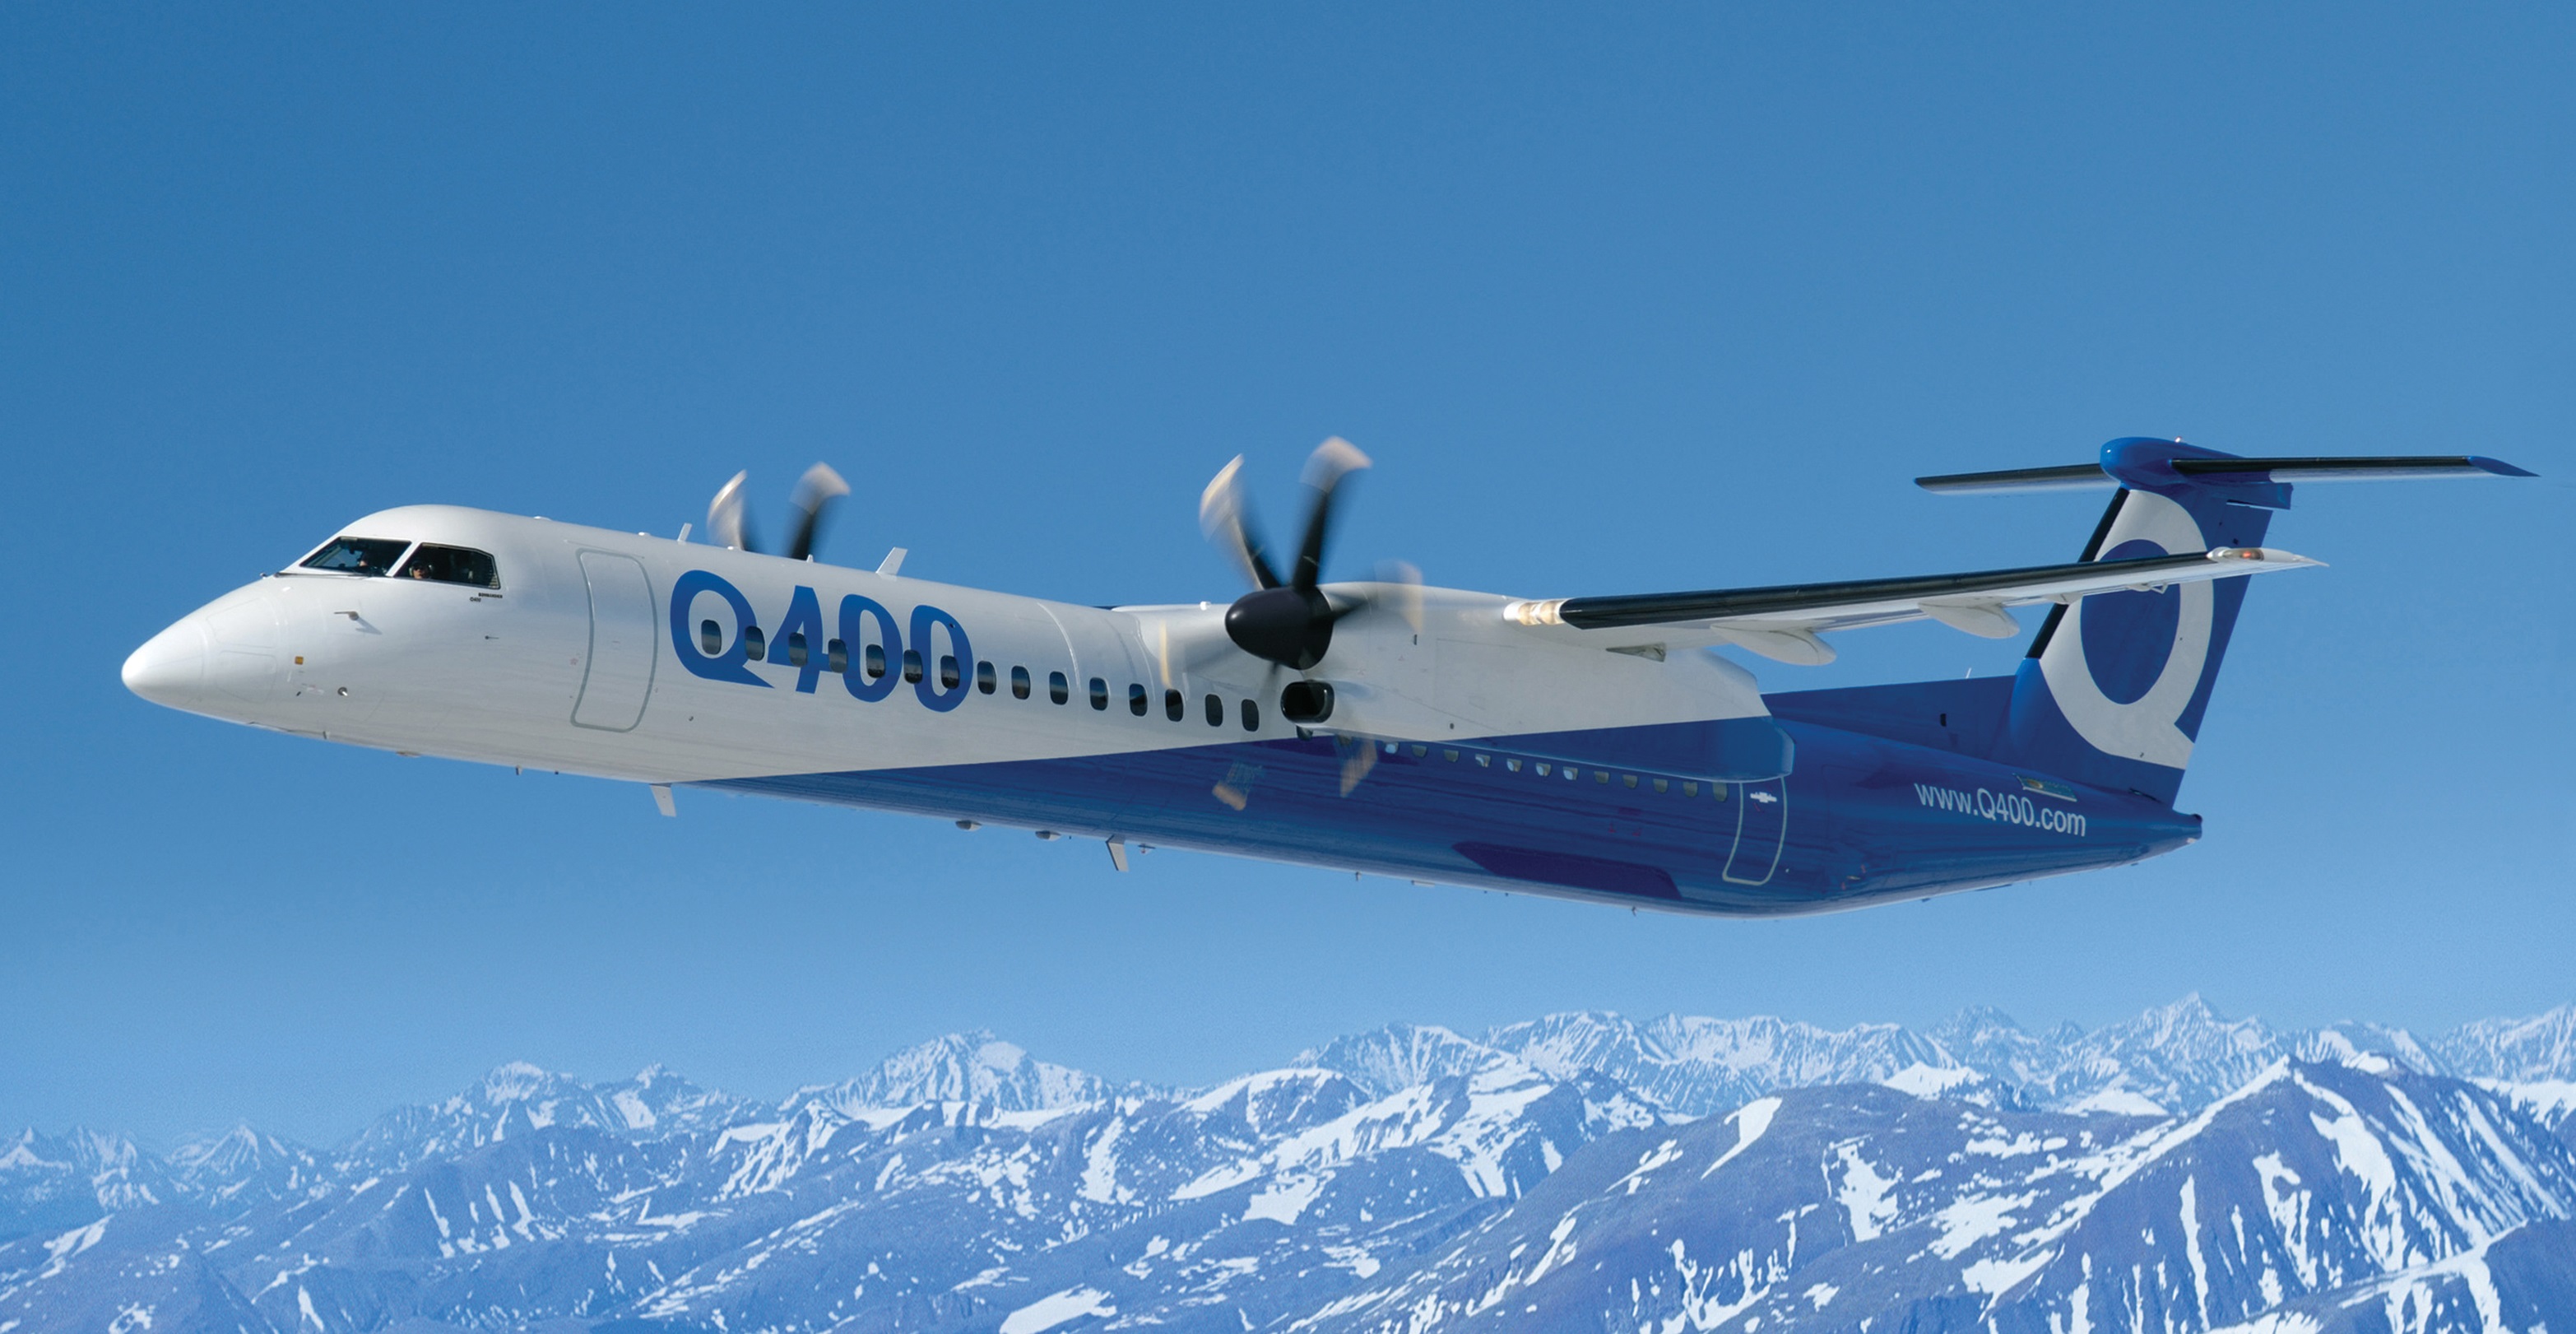 Bombardier Q400 over mountains